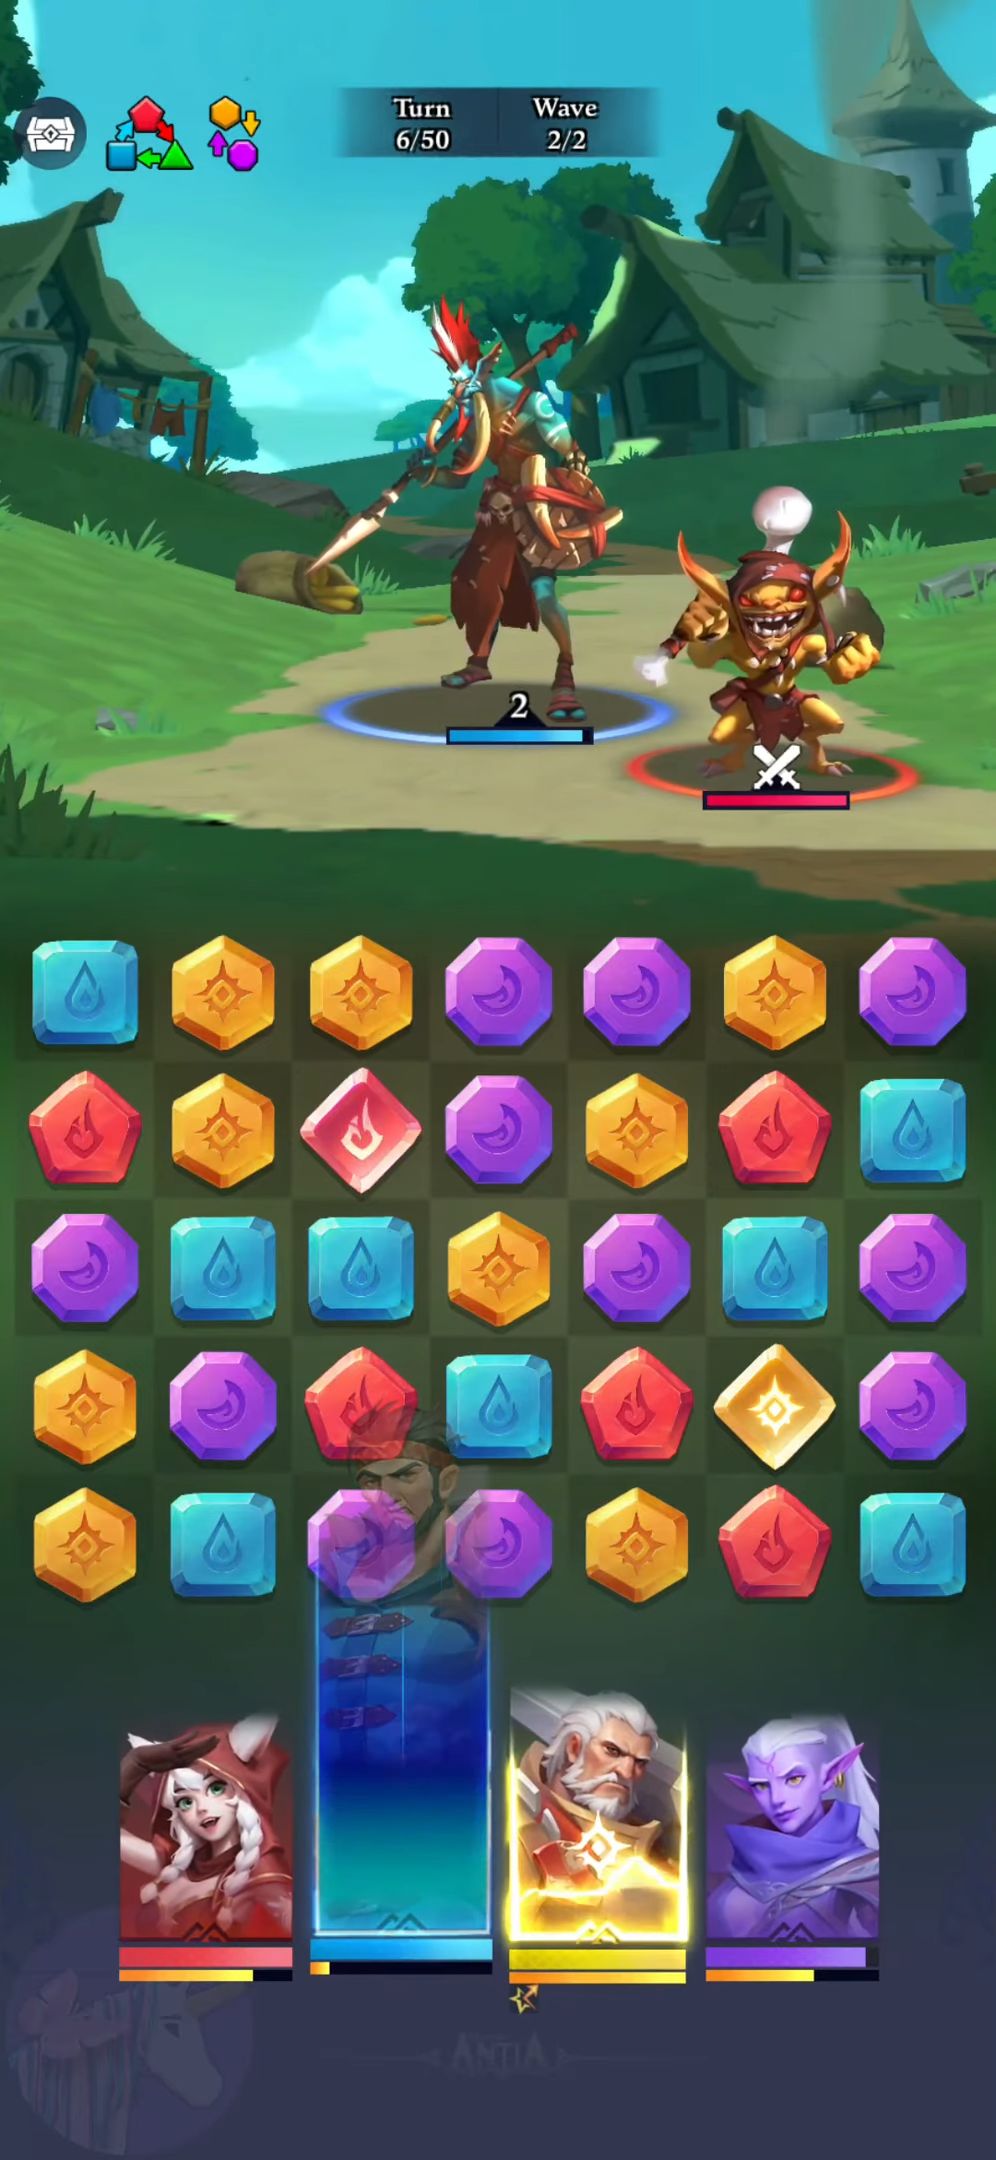 Gameplay of the Call of Antia: Match 3 RPG for Android phone or tablet.